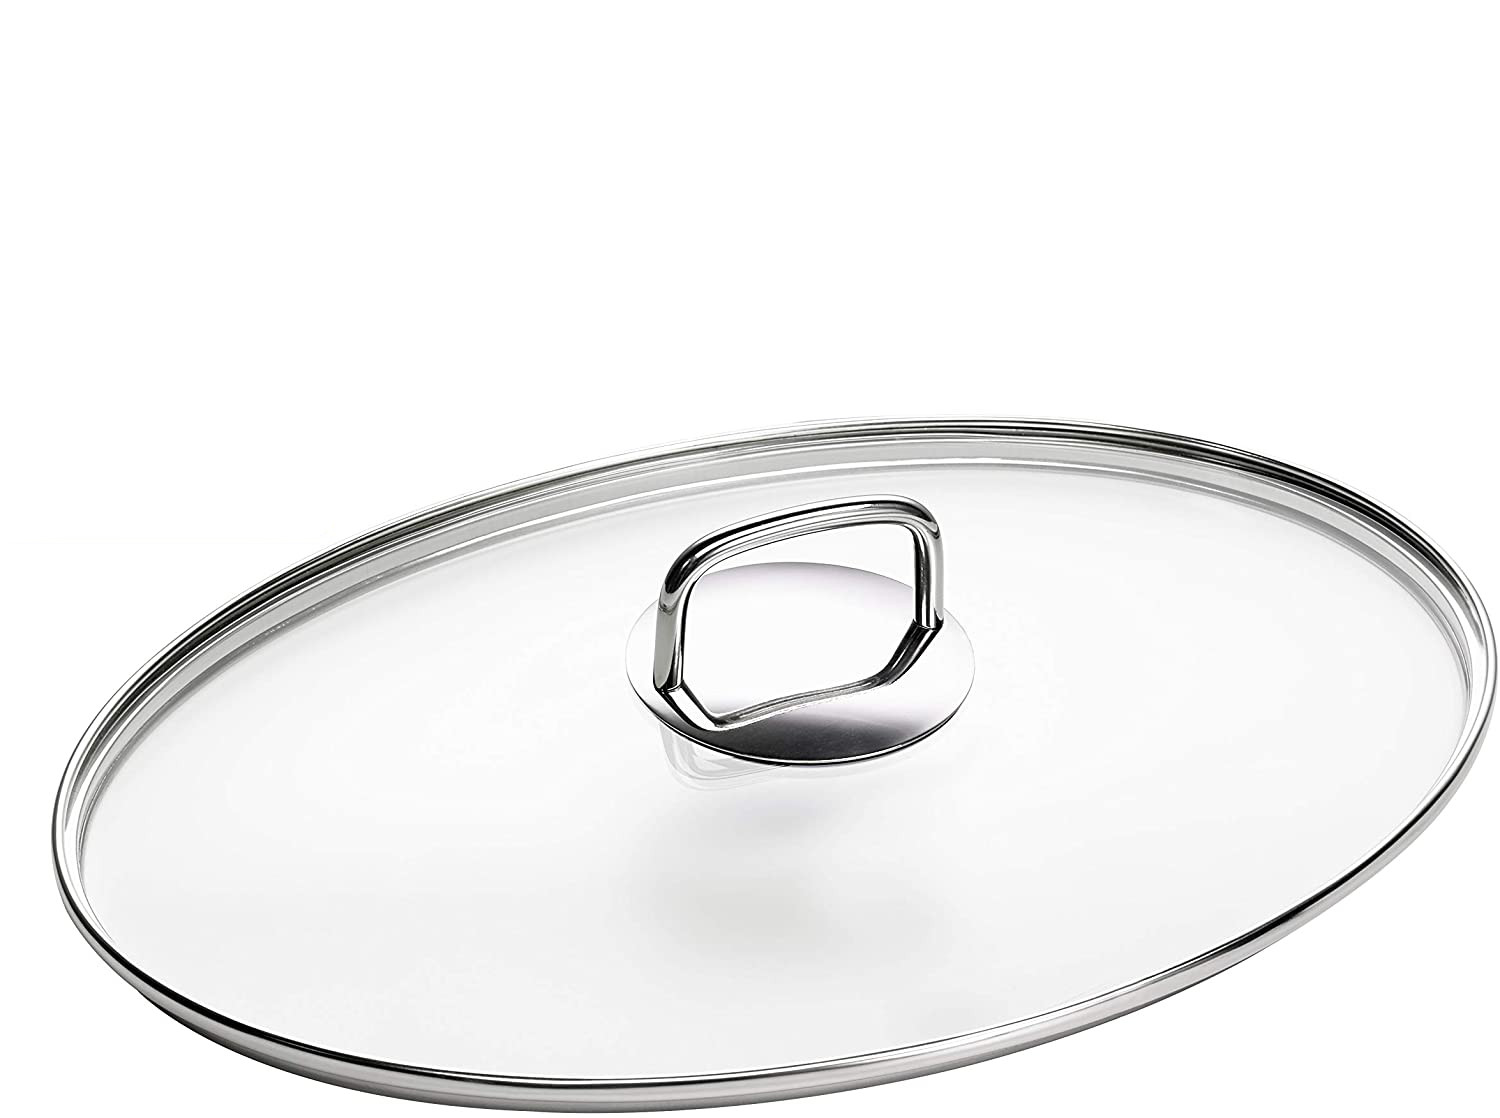 Schulte-Ufer 1996-34 Green Life lid for fish pan Charisma, 36 cm, glass